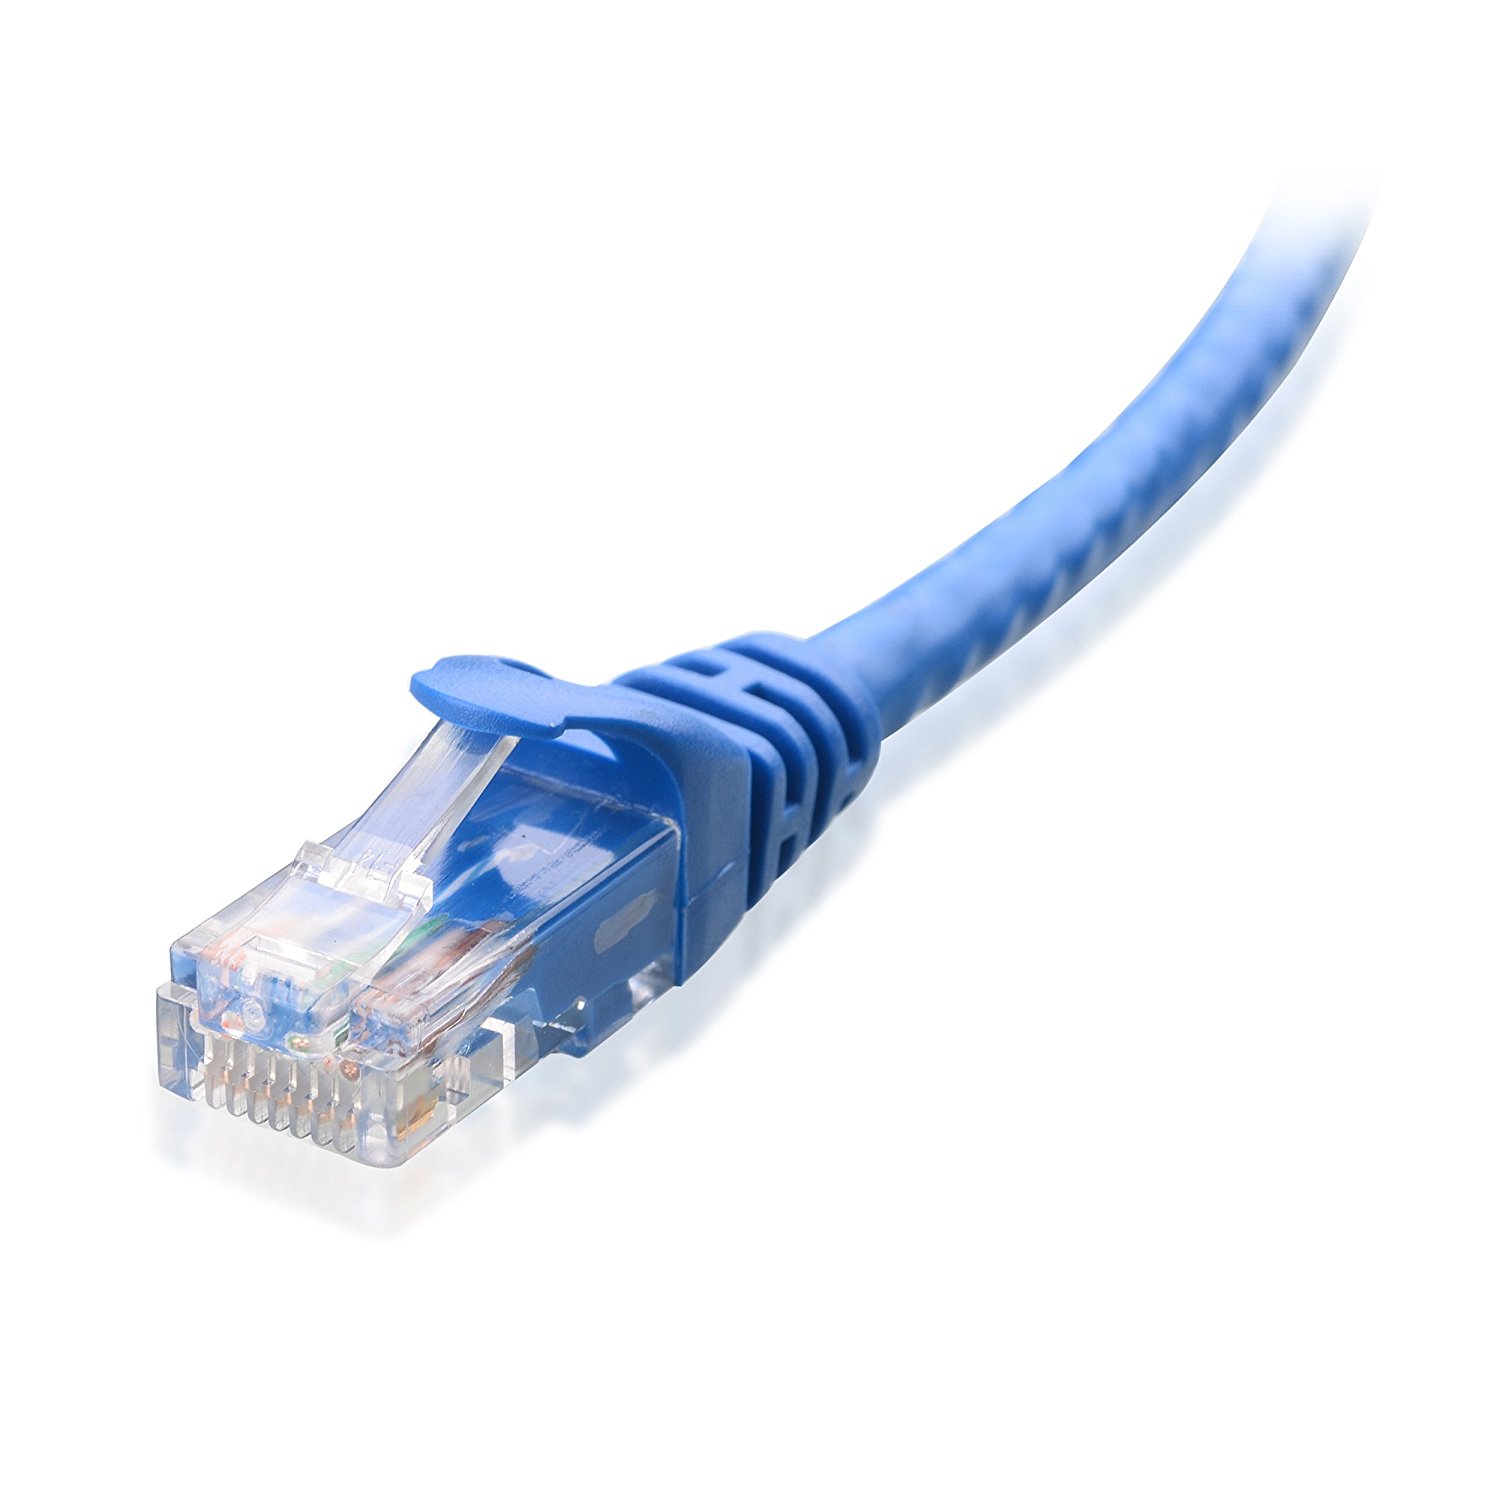 Advanced Communications Services Ethernet Cabling.